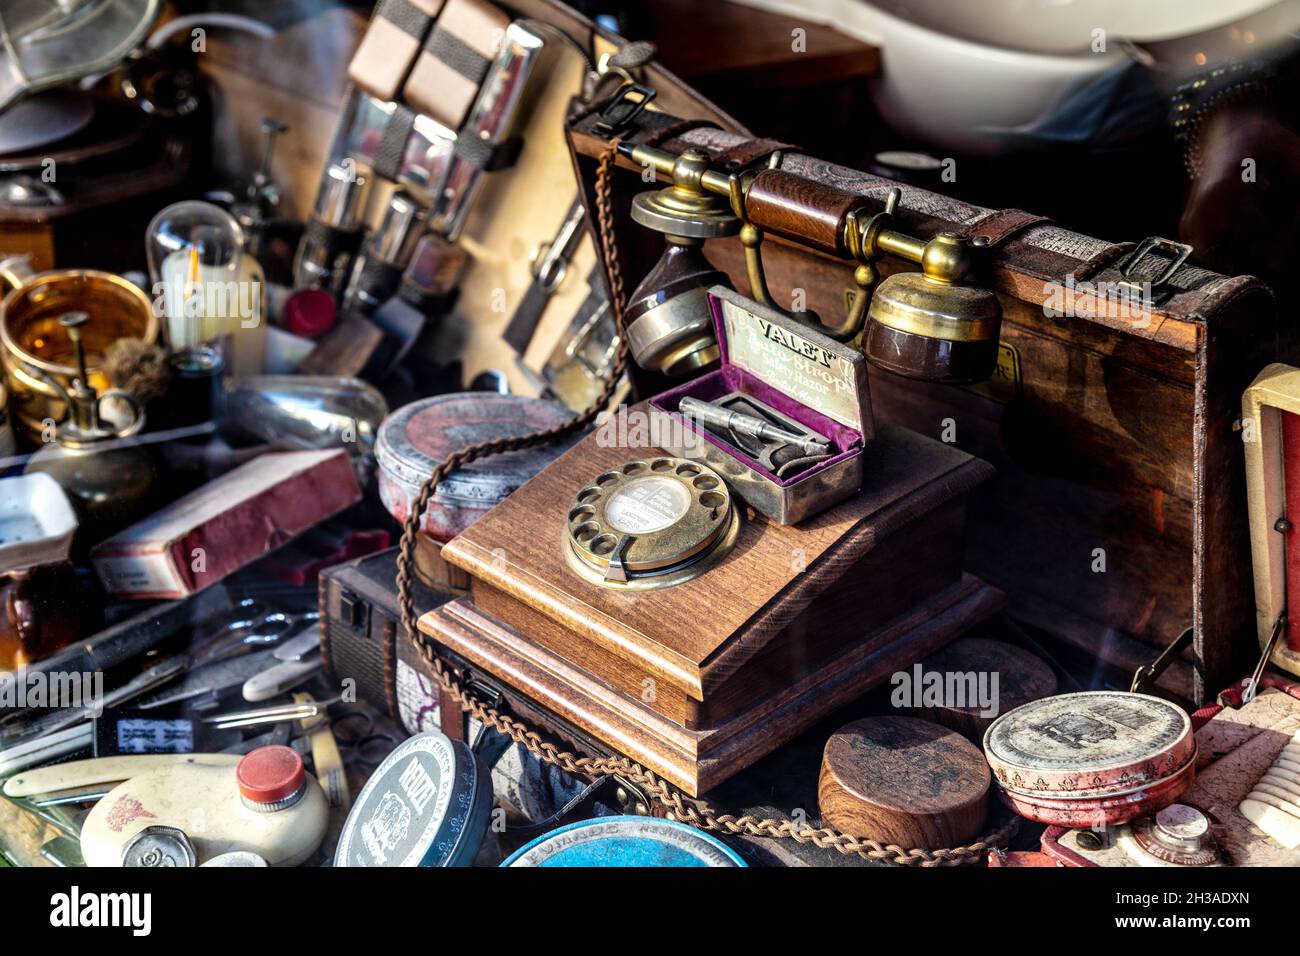 Display of vintage and retro babrer shop accessories, razors, hair products and rotary telephone (Palace Barber, East Molesey, London, UK) Stock Photo